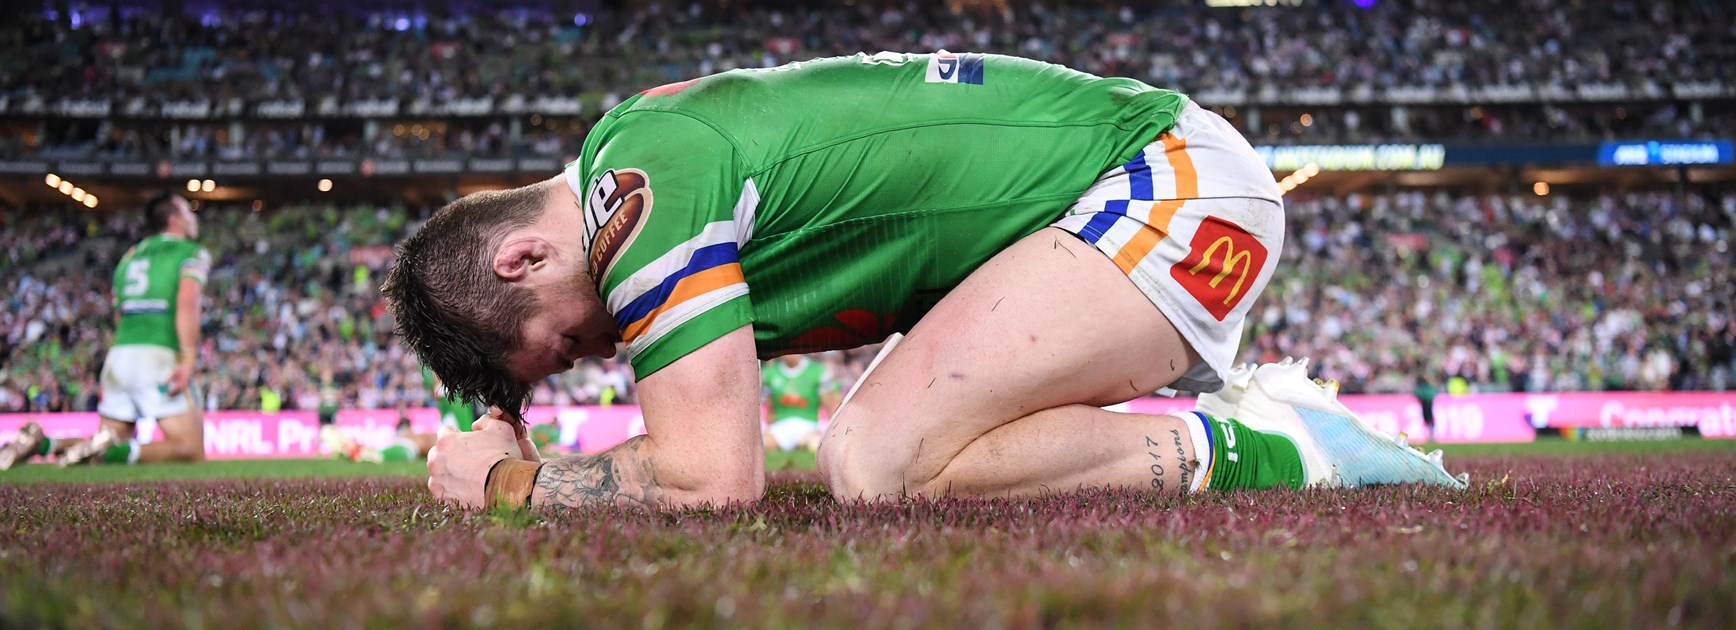 John Bateman collapses to the turf after giving it his all in the 2019 grand final.